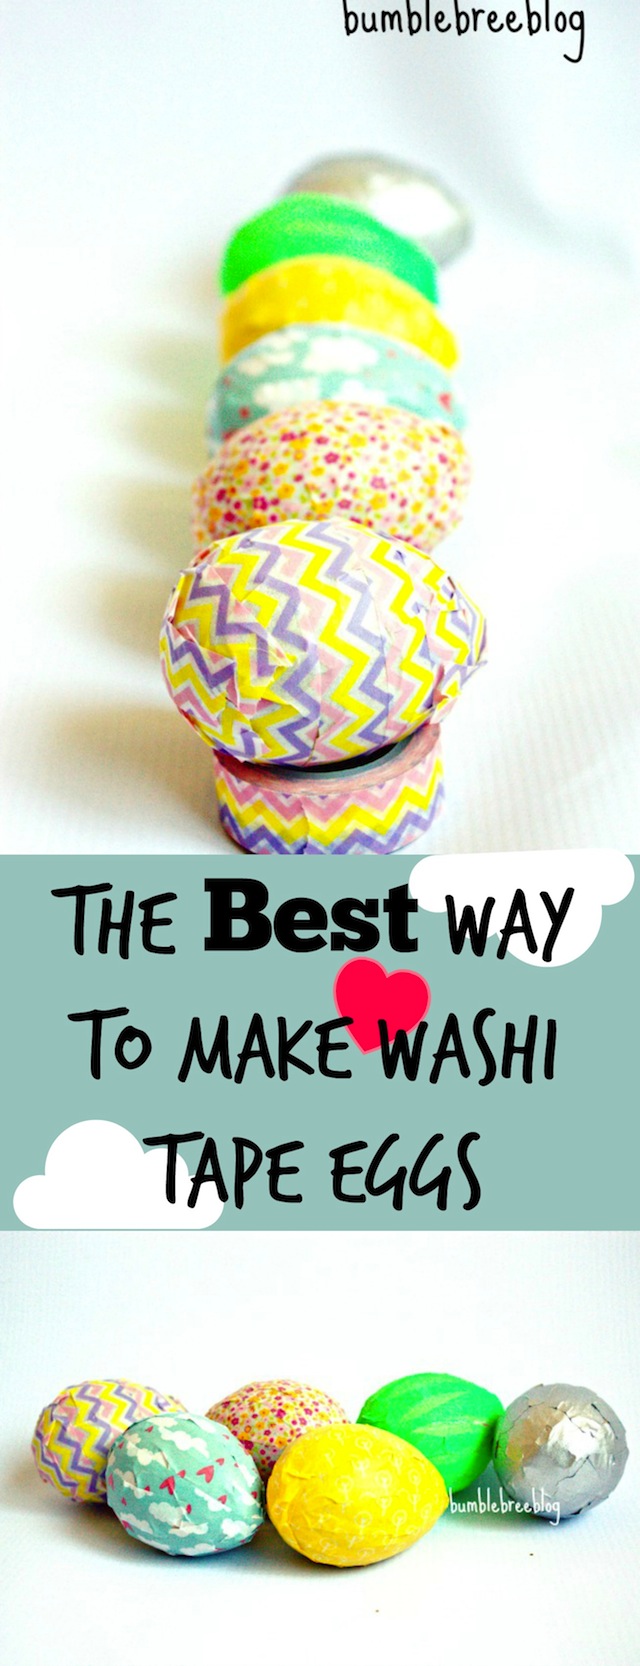 The-Best-Way-to-make-Washi-Tape-Eggs